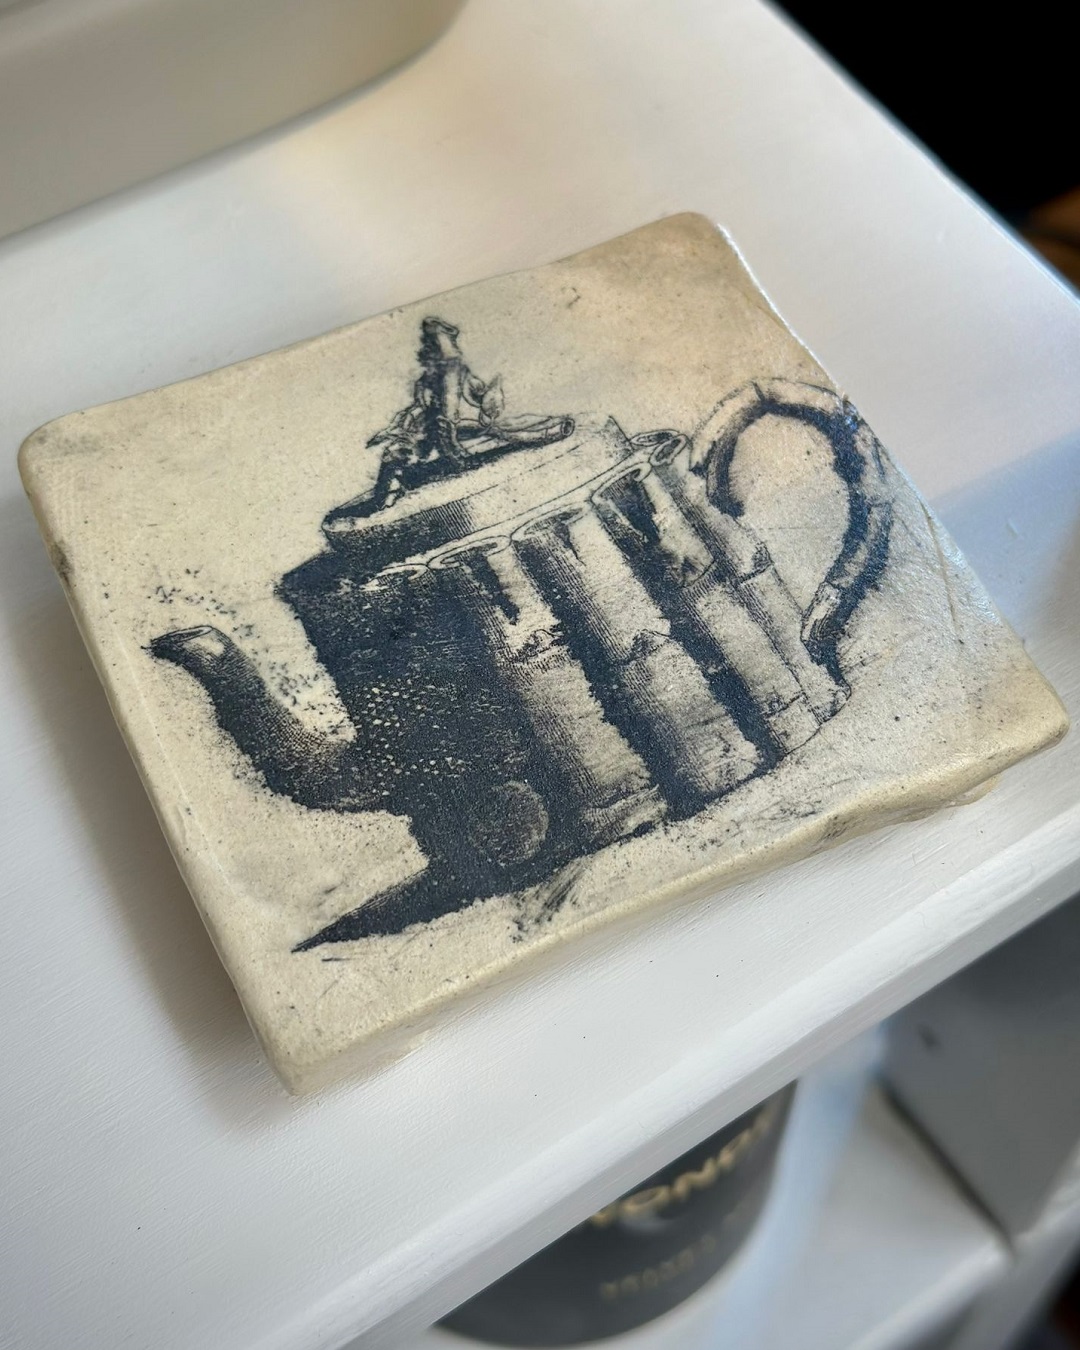 Square plinth with teapot print on it